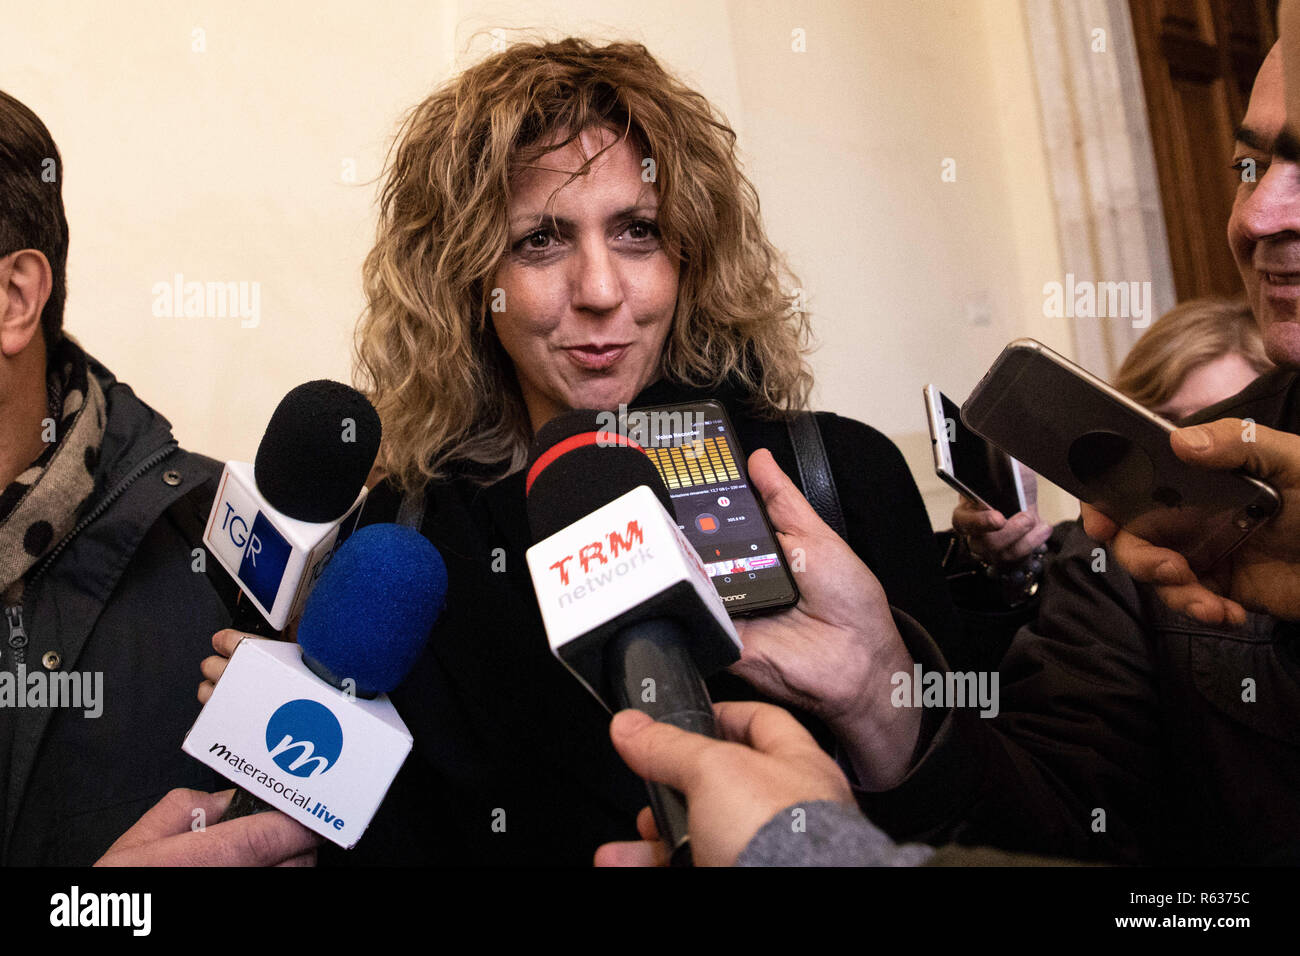 Matera, Italy. 3rd Dec, 2018. The Minister of the South Barbara lezzi seen speaking at a press conference after the coordination meeting with the Municipality of Matera, the Matera Foundation 2019, FAL, Anas, Invitalia to check the time schedule of the infrastructural works planned for Matera 2019. Credit: Cosimo Martemucci/SOPA Images/ZUMA Wire/Alamy Live News Stock Photo